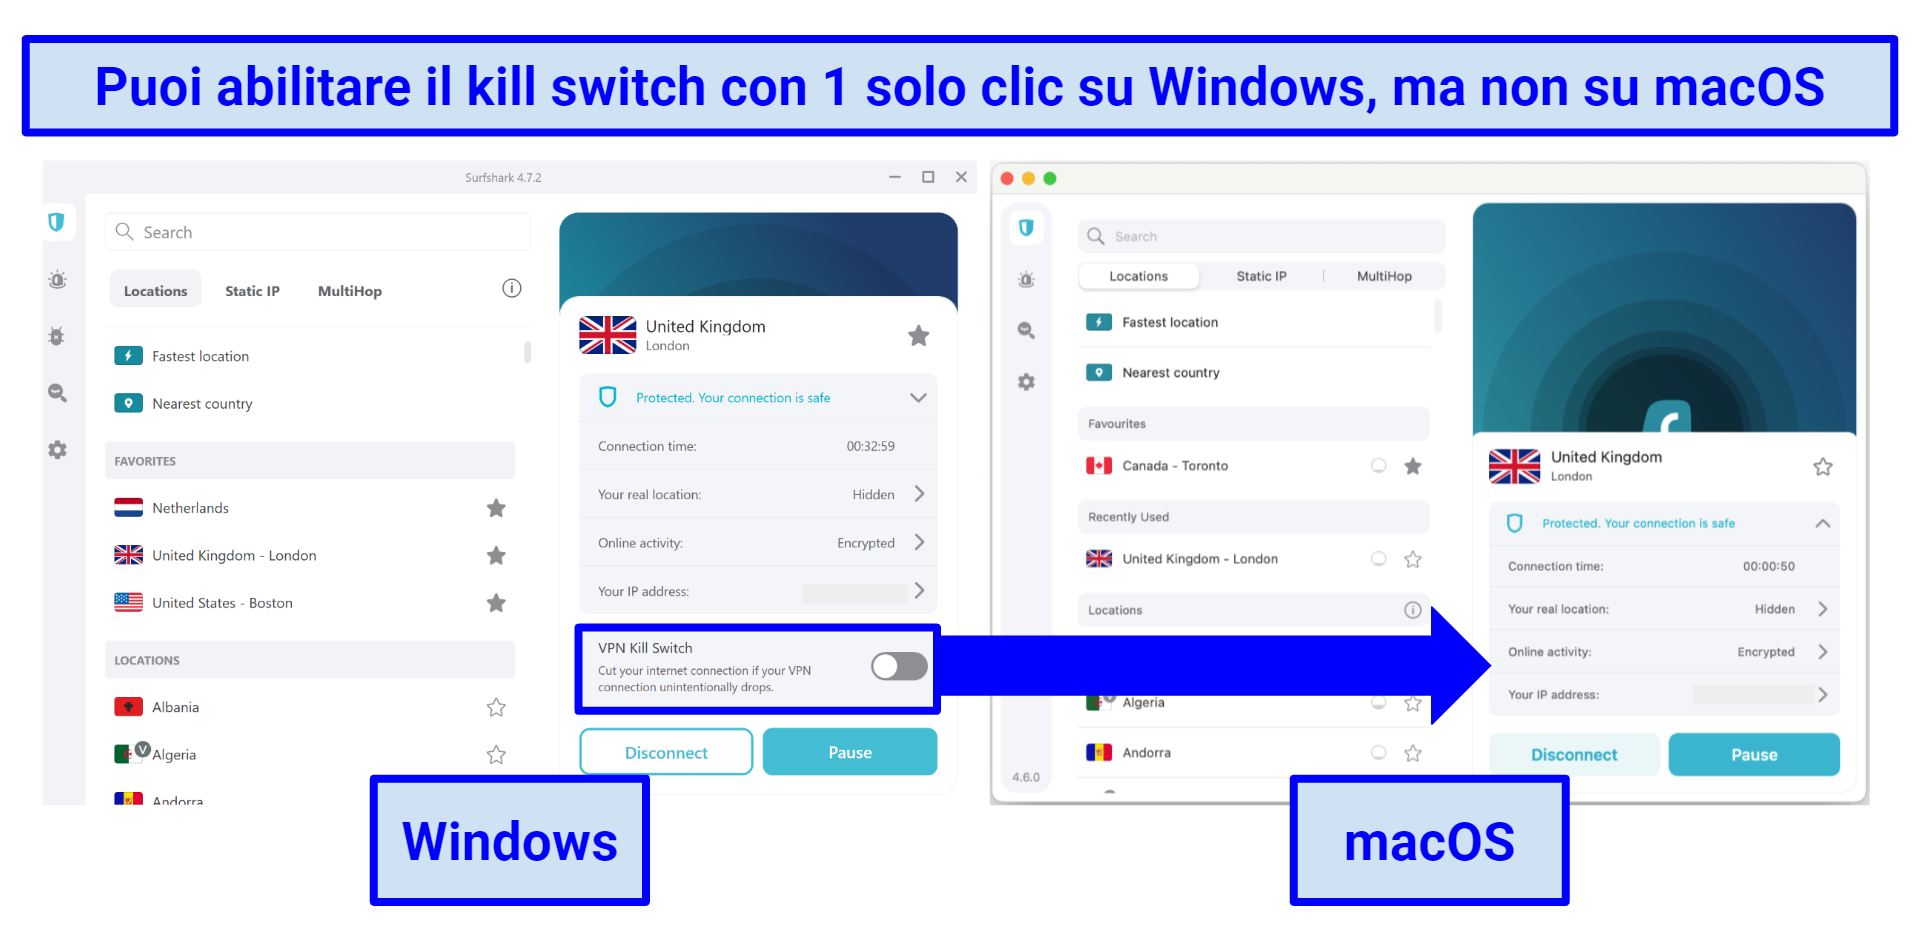 Screenshots comparing Surshark's Windows and macOS apps